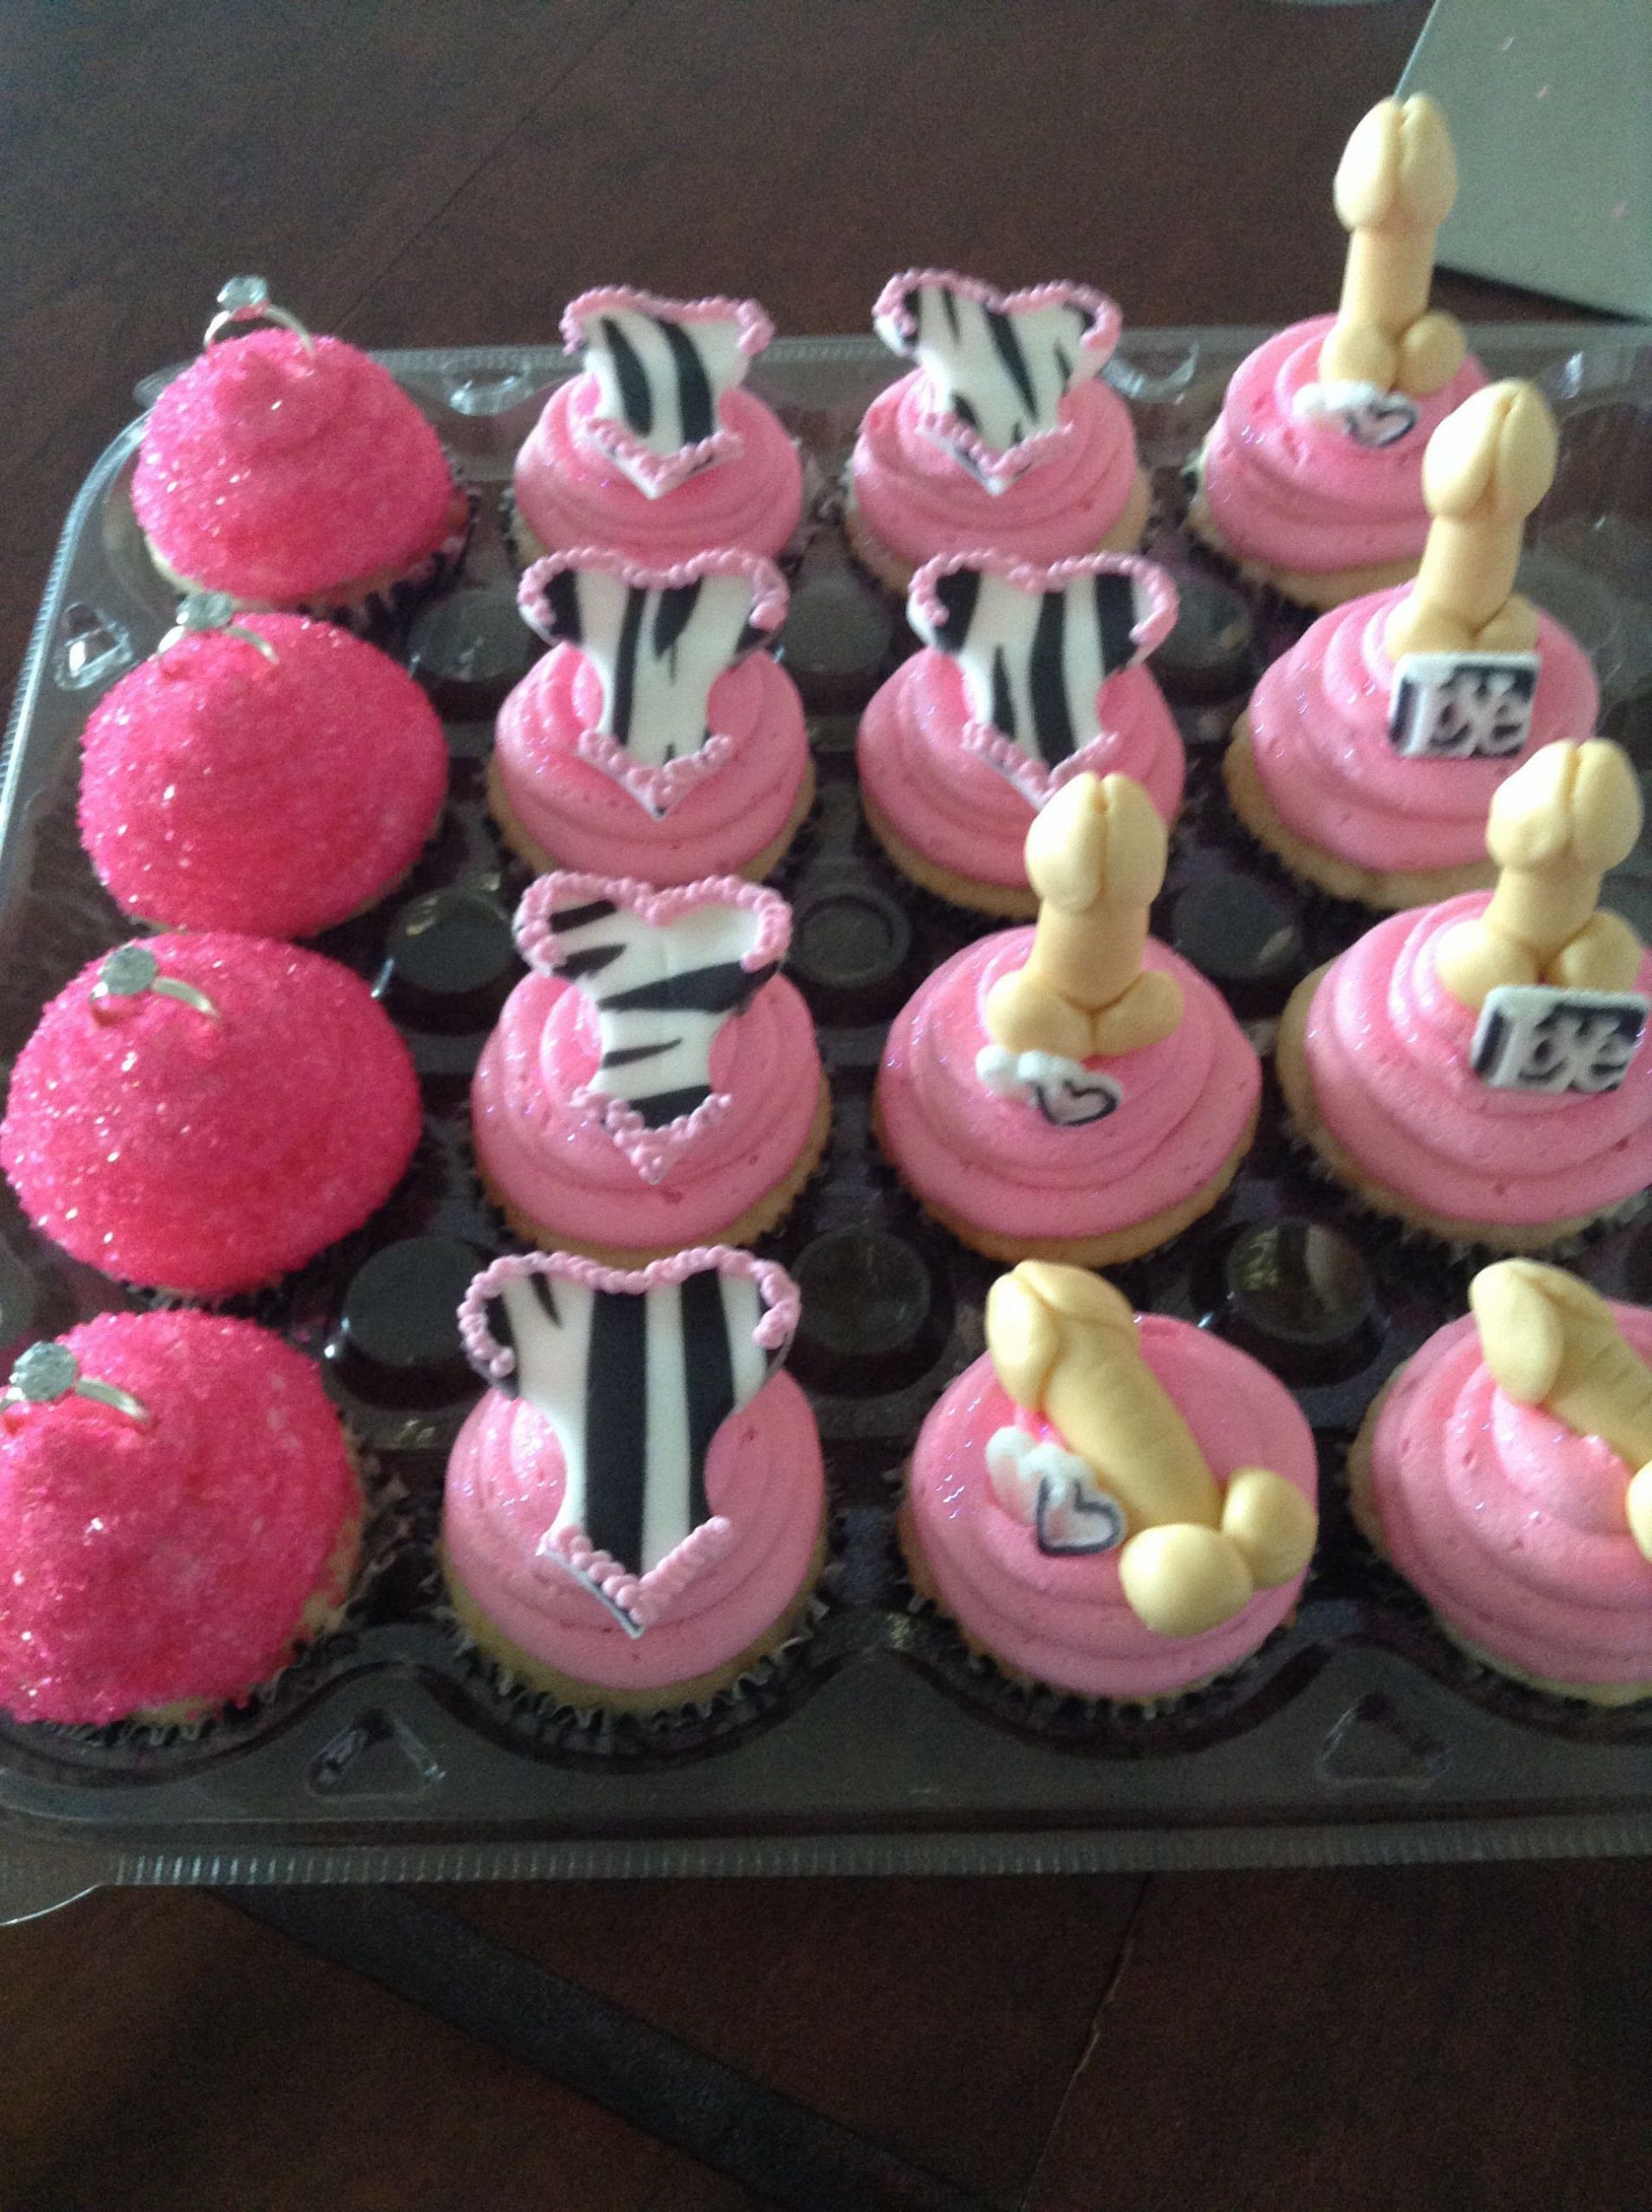 Bachelorette Party Cupcake Ideas
 Bachelorette cupcakes Perfect for sugar and spice